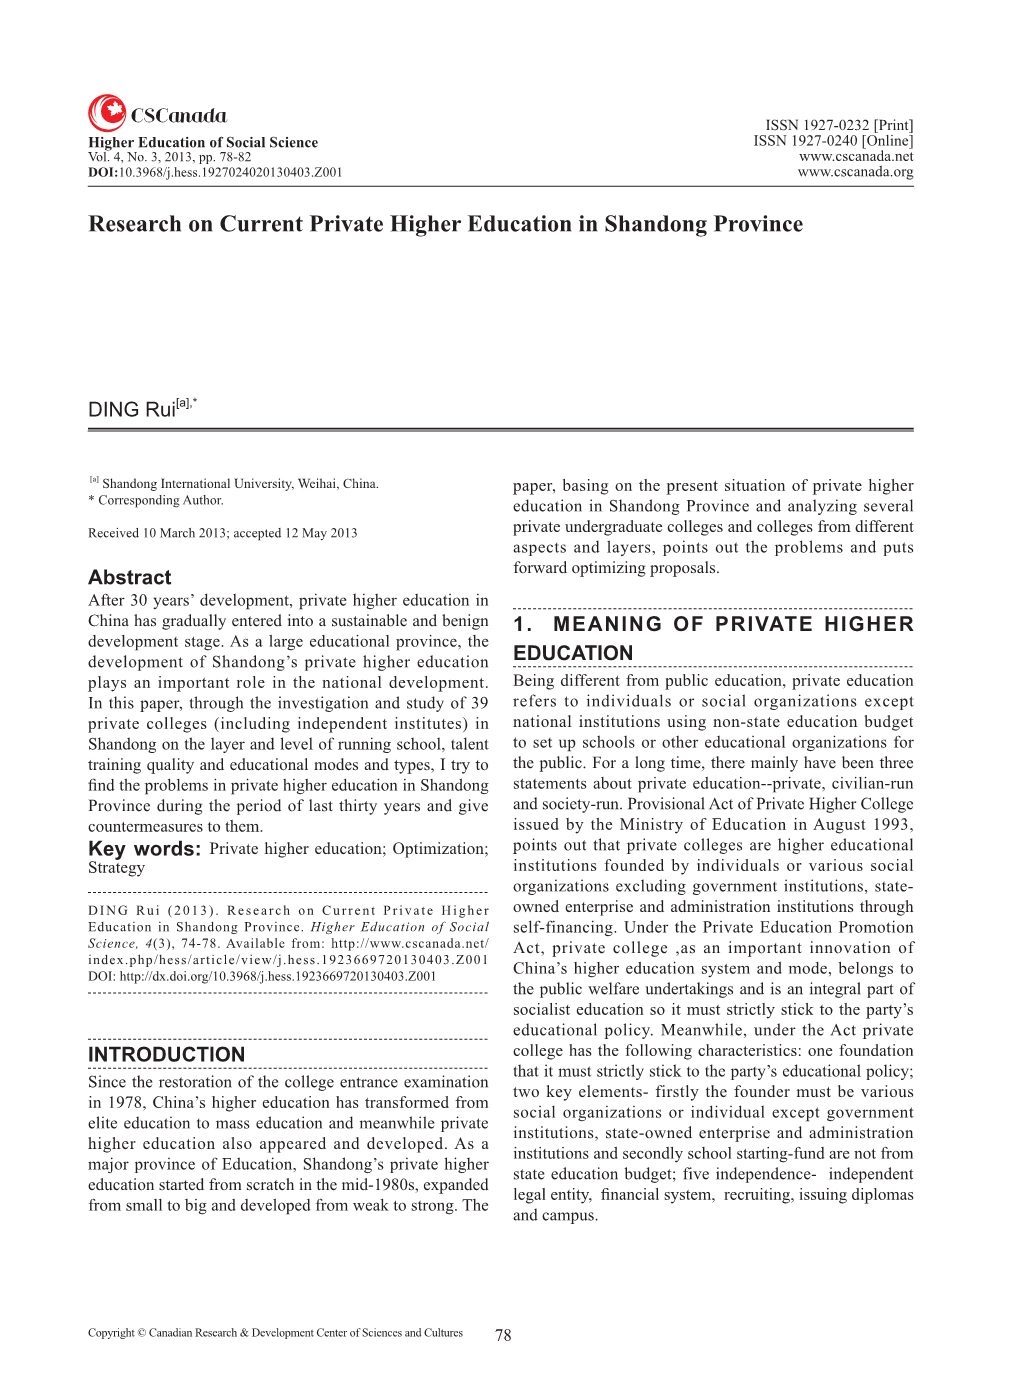 Research on Current Private Higher Education in Shandong Province